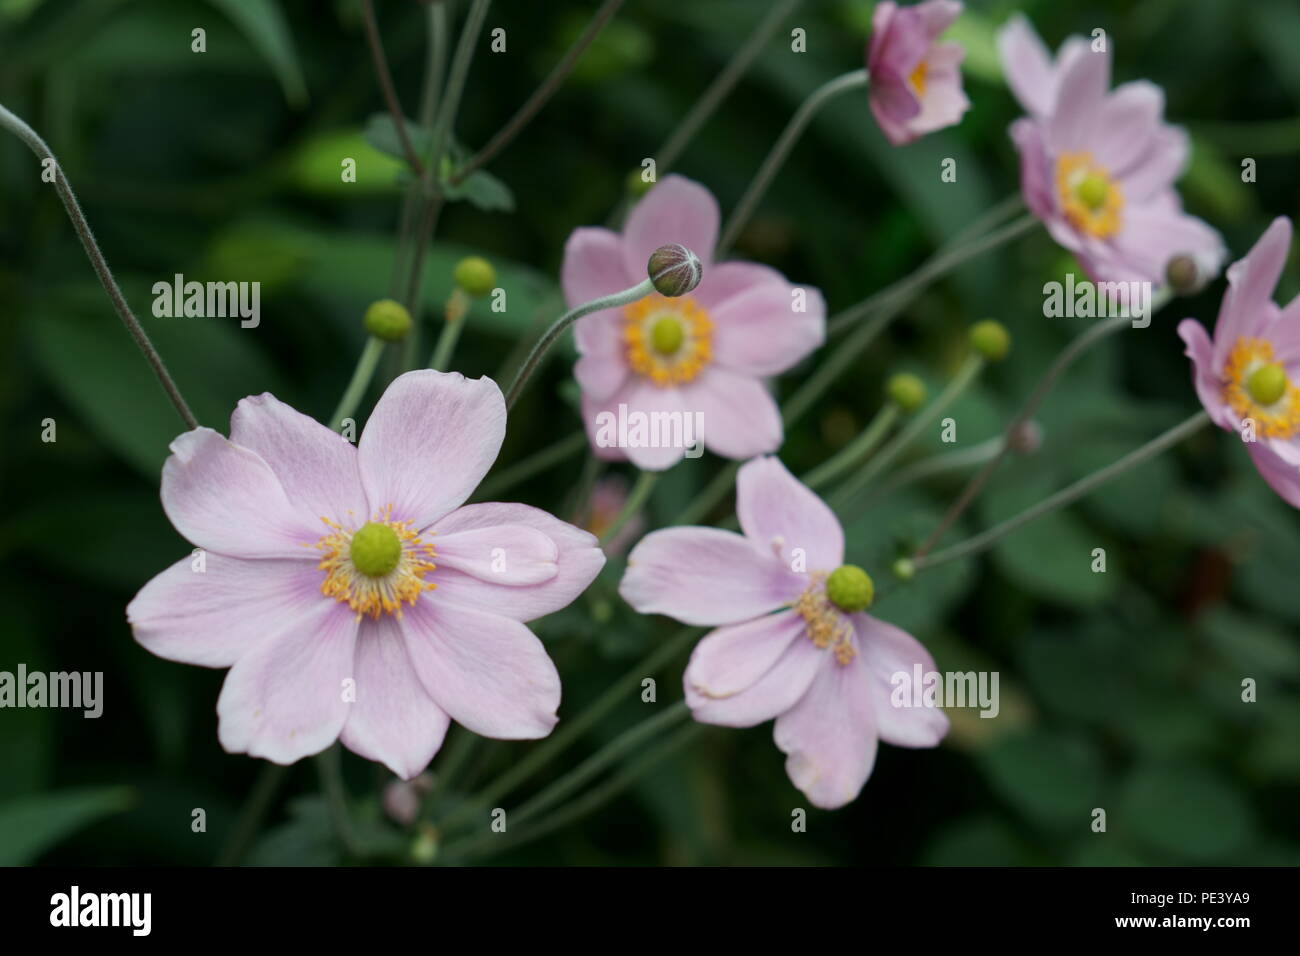 Pink flowers a look-alike of daisy- Anemone Flower Photos Stock Photo